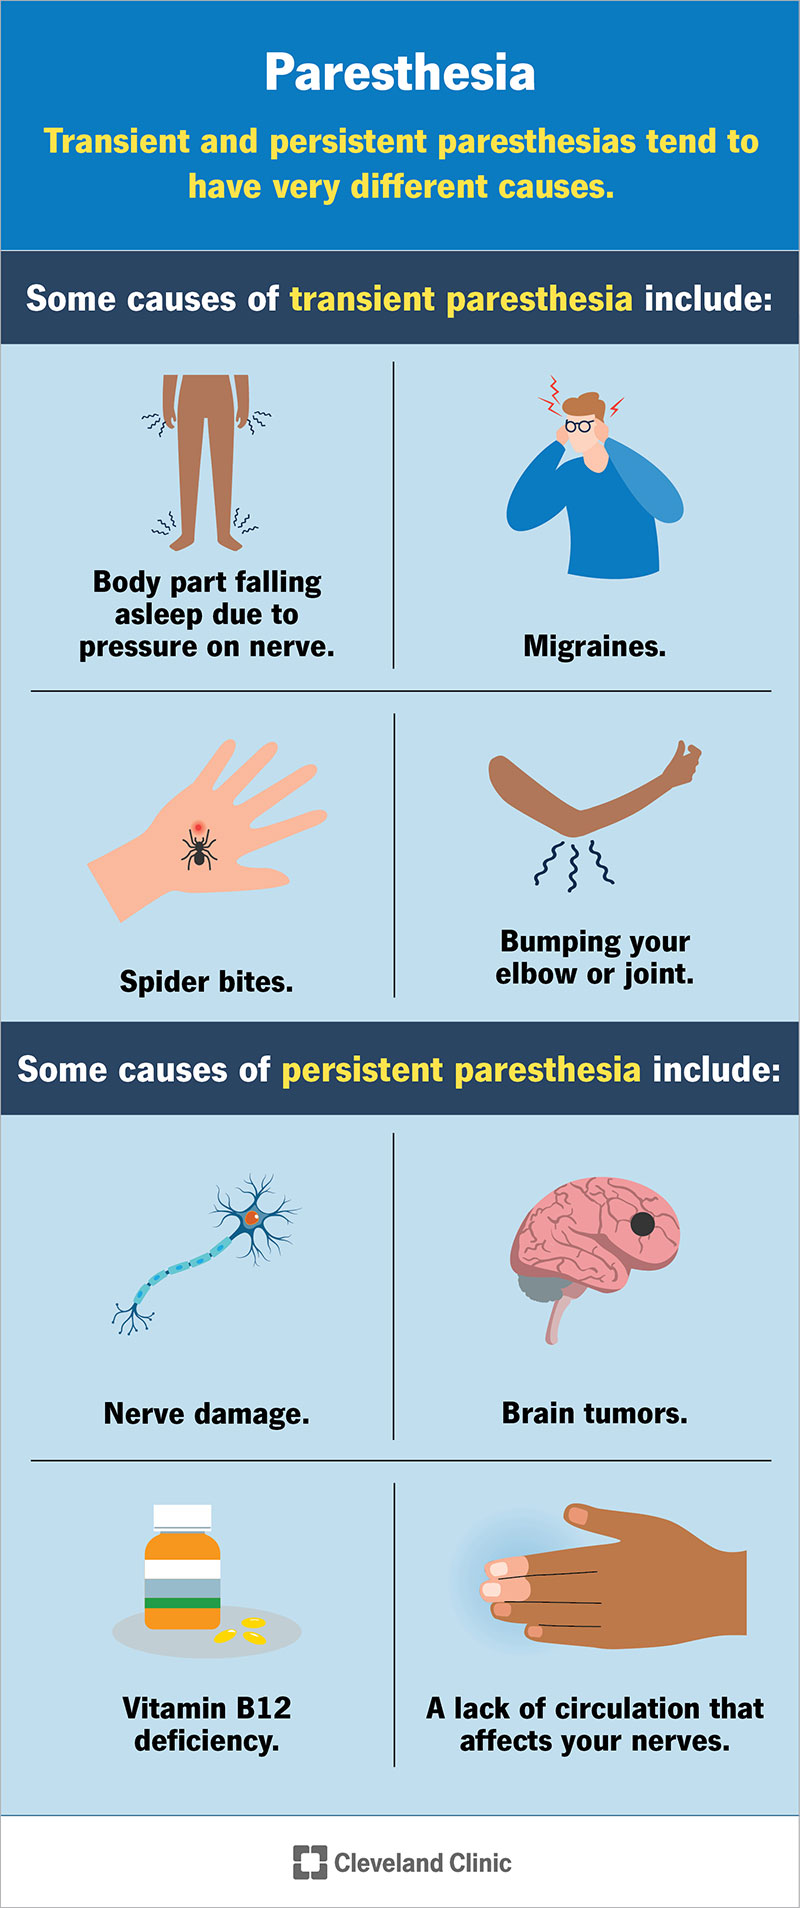 Paresthesia can be transient and short-lived or persistent and long-lasting. Persistent causes are usually more serious.